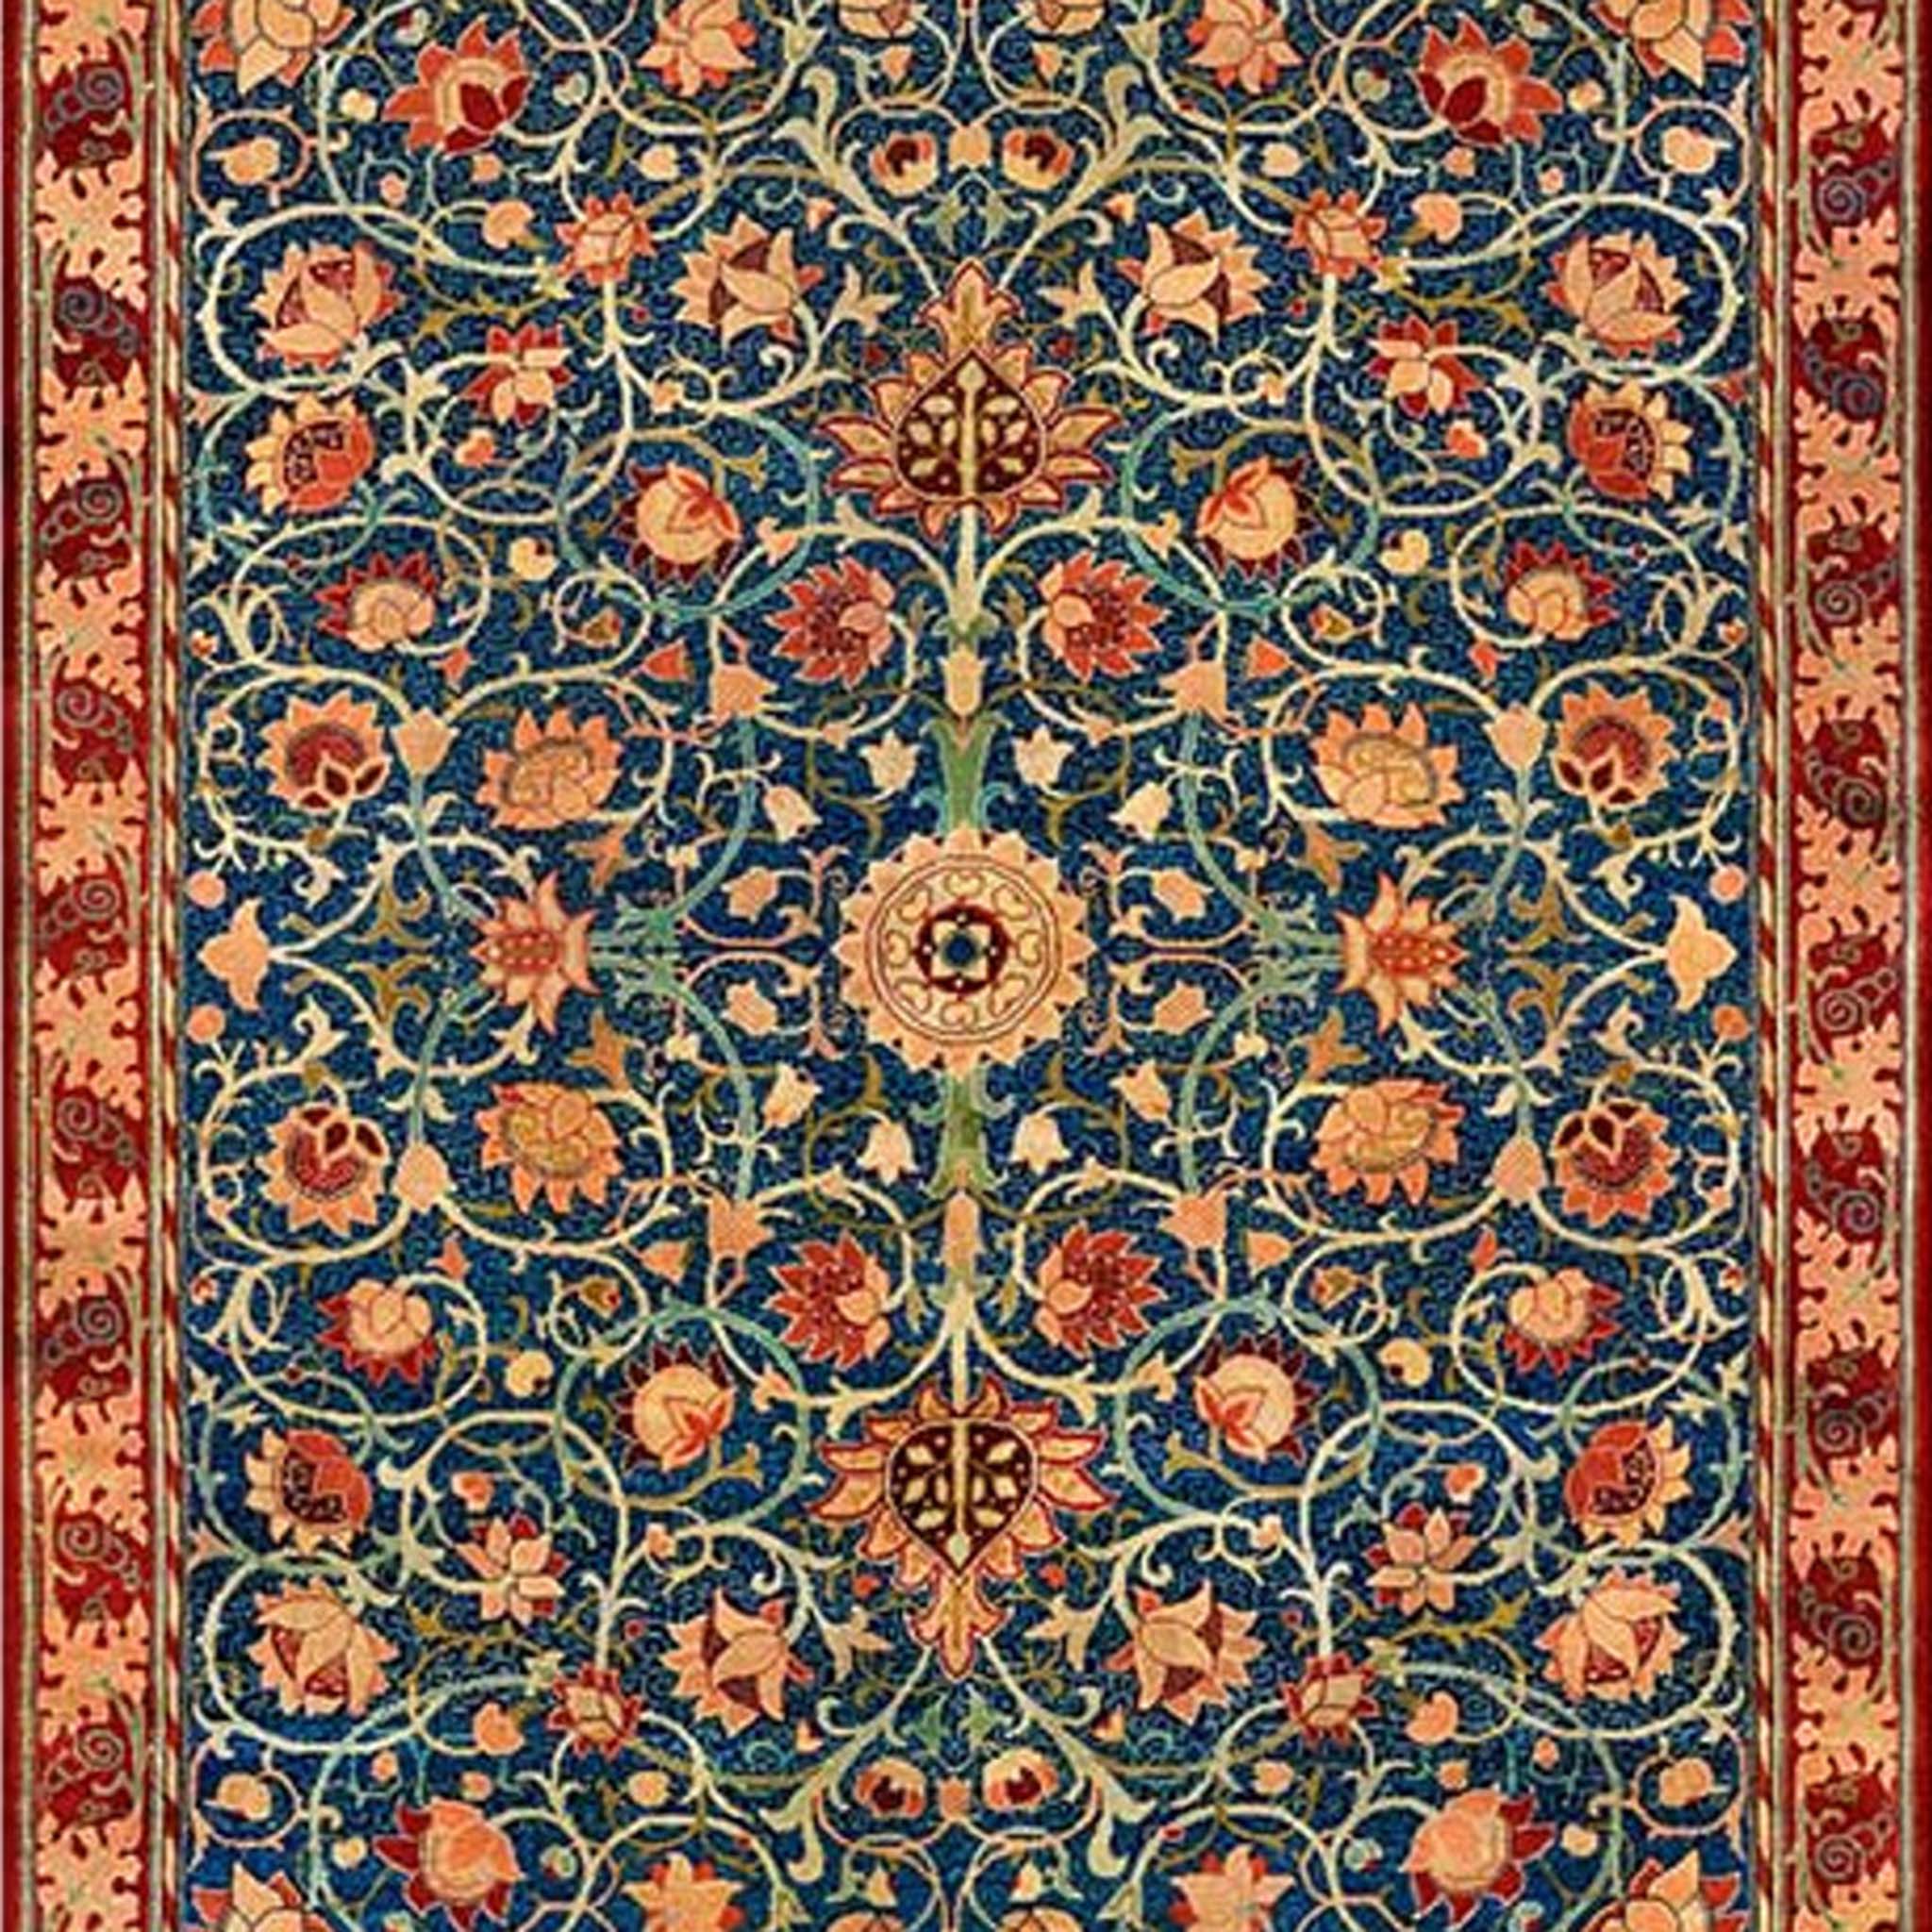 Close-up of an A0 rice paper design of a vintage carpet of reds and blues and features a repeating floral pattern.